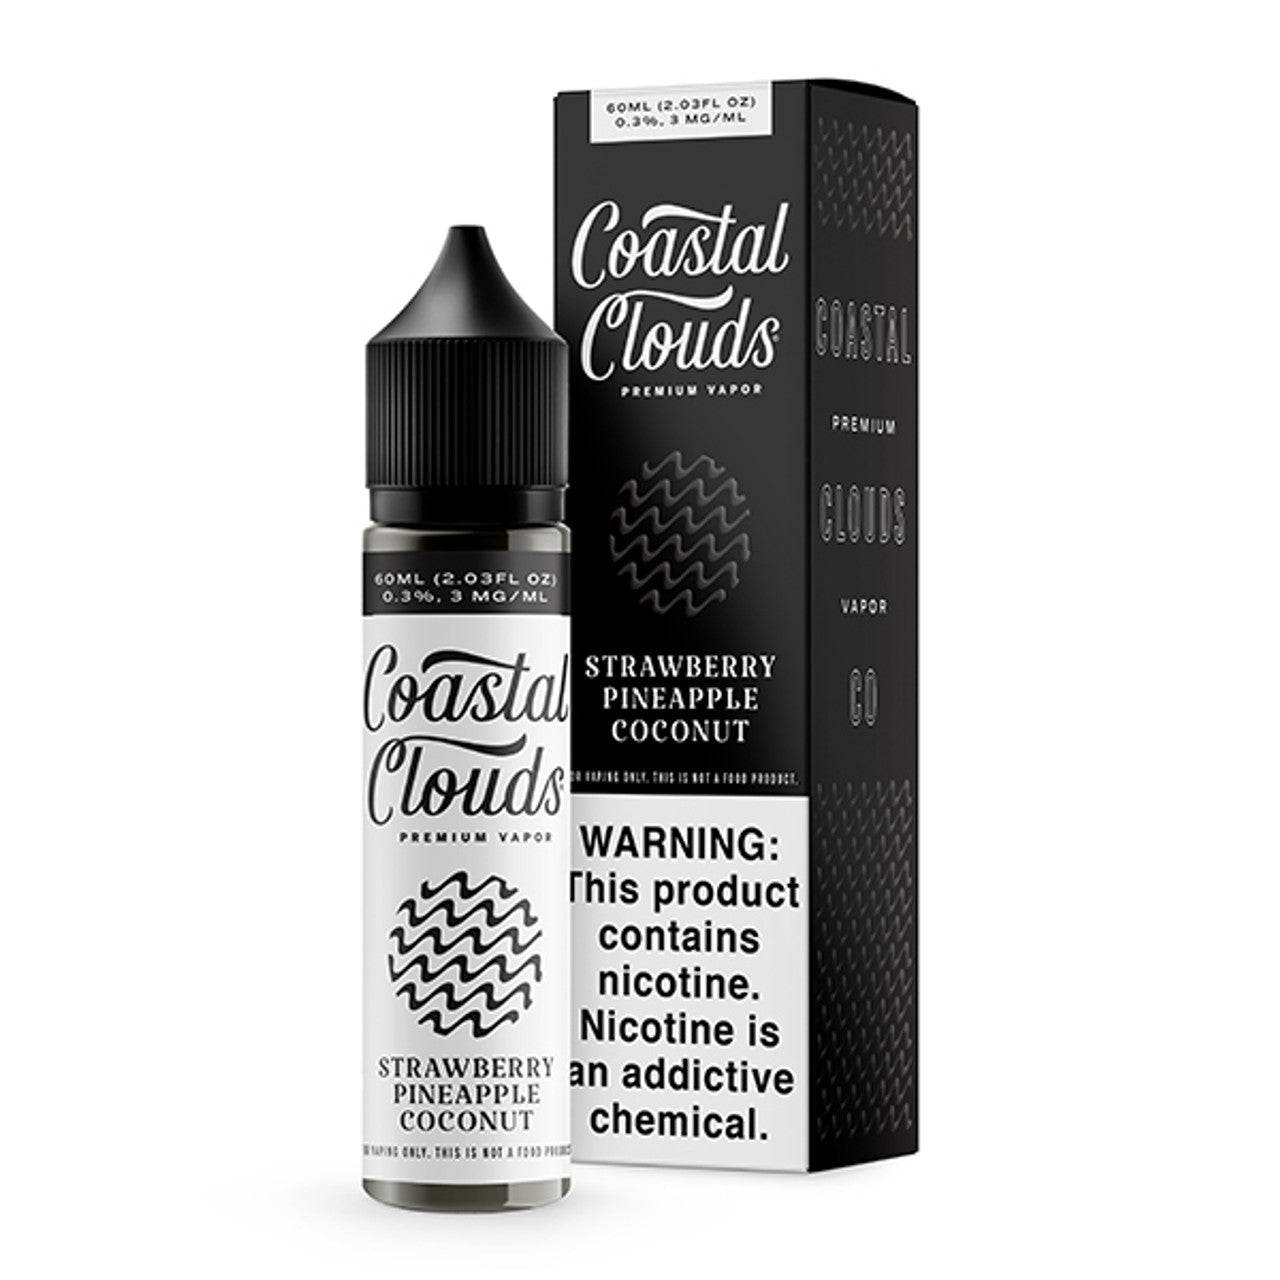 Coastal Clouds E-Liquid | 60mL | Strawberry Pineapple Coconut with packaging